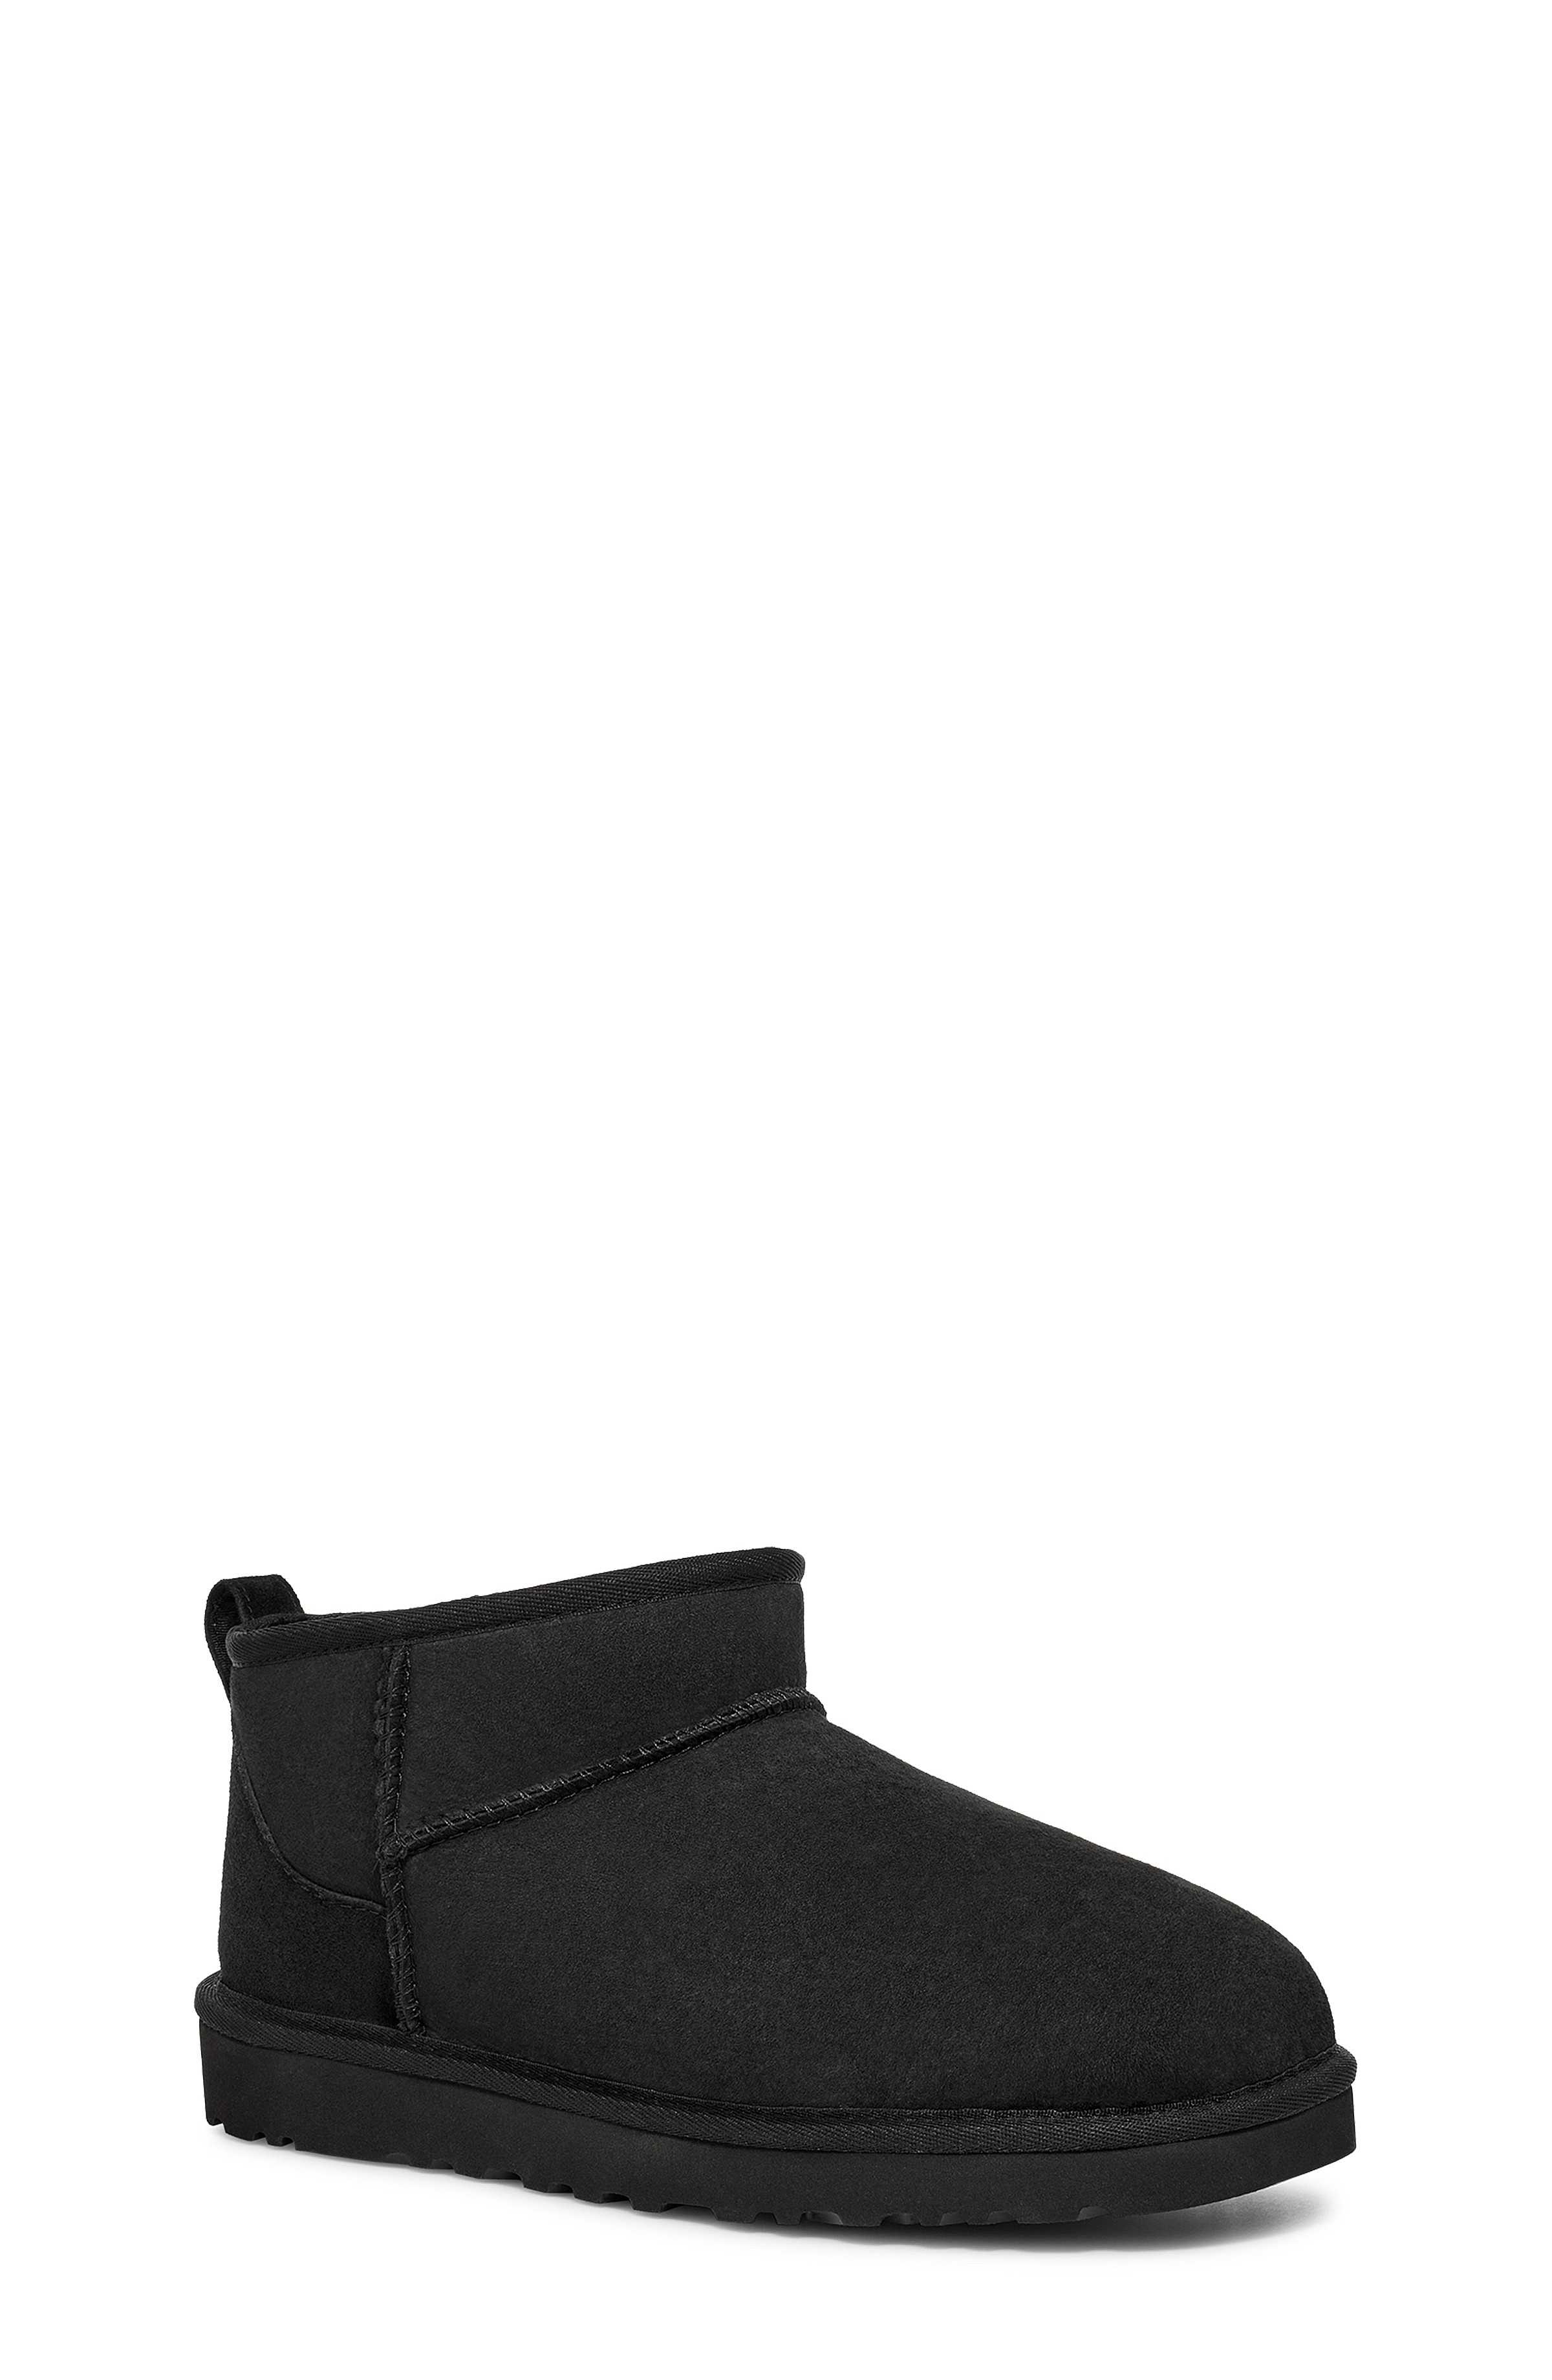 Classic Ultra Mini, | UGG Outlet